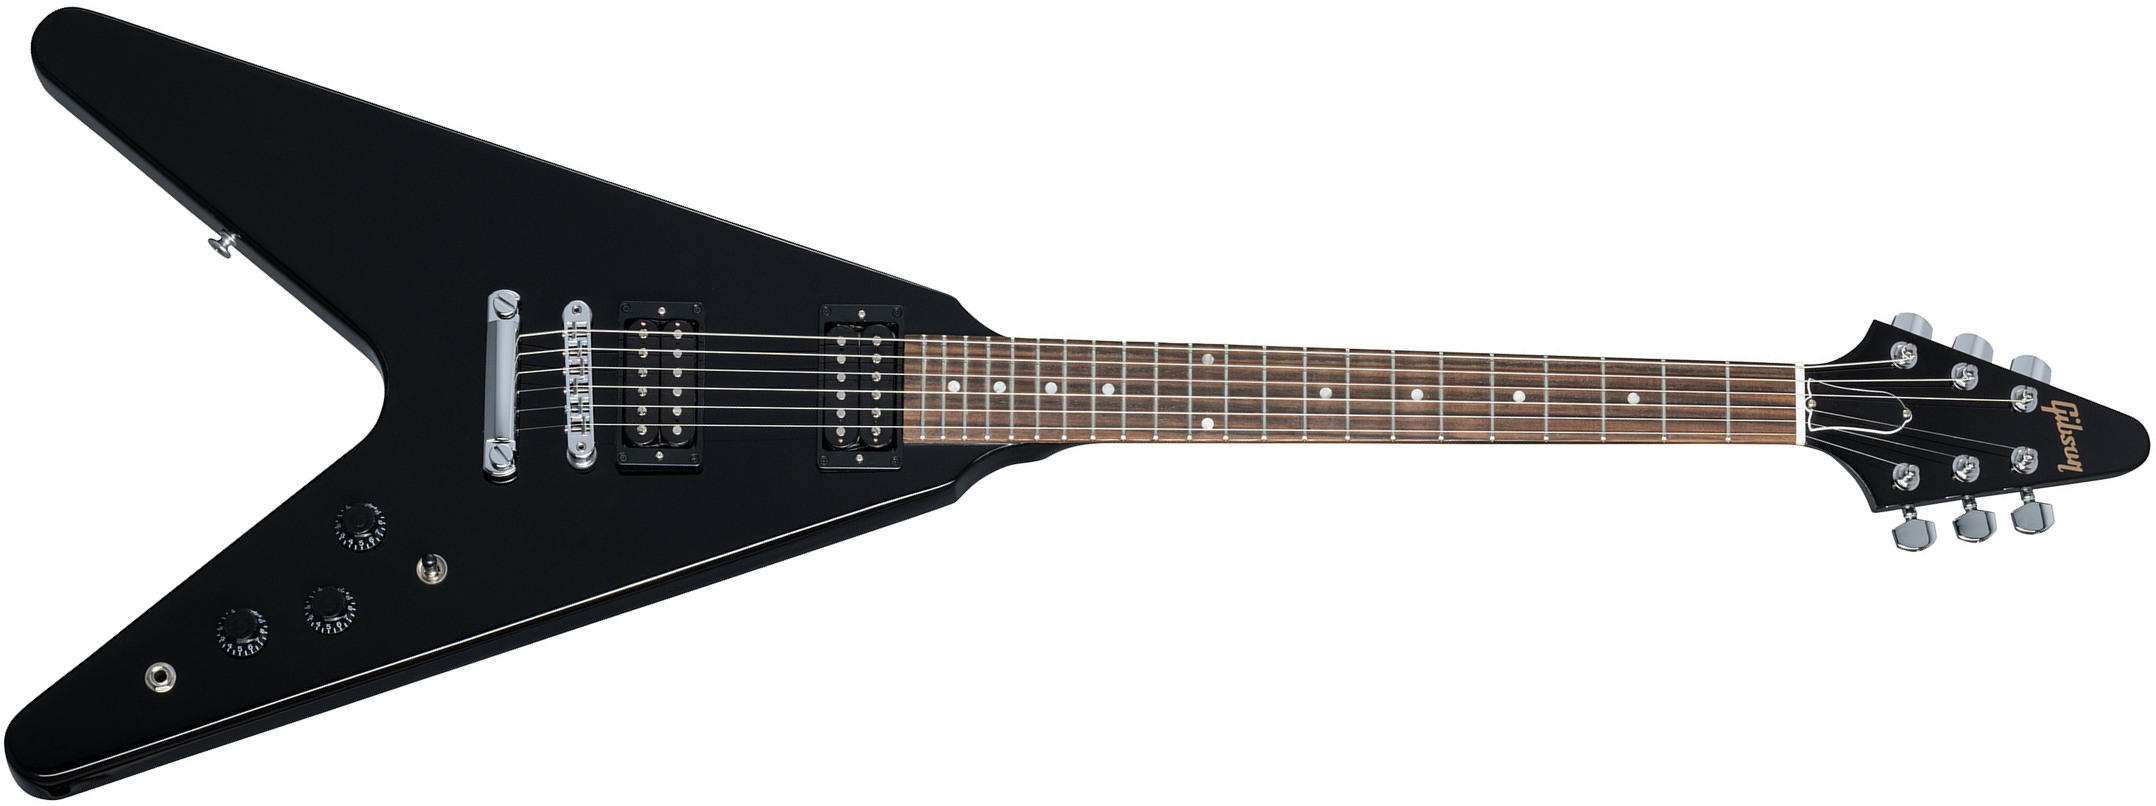 Gibson Flying V 80s 2h Ht Rw - Ebony - Guitarra electrica metalica - Main picture